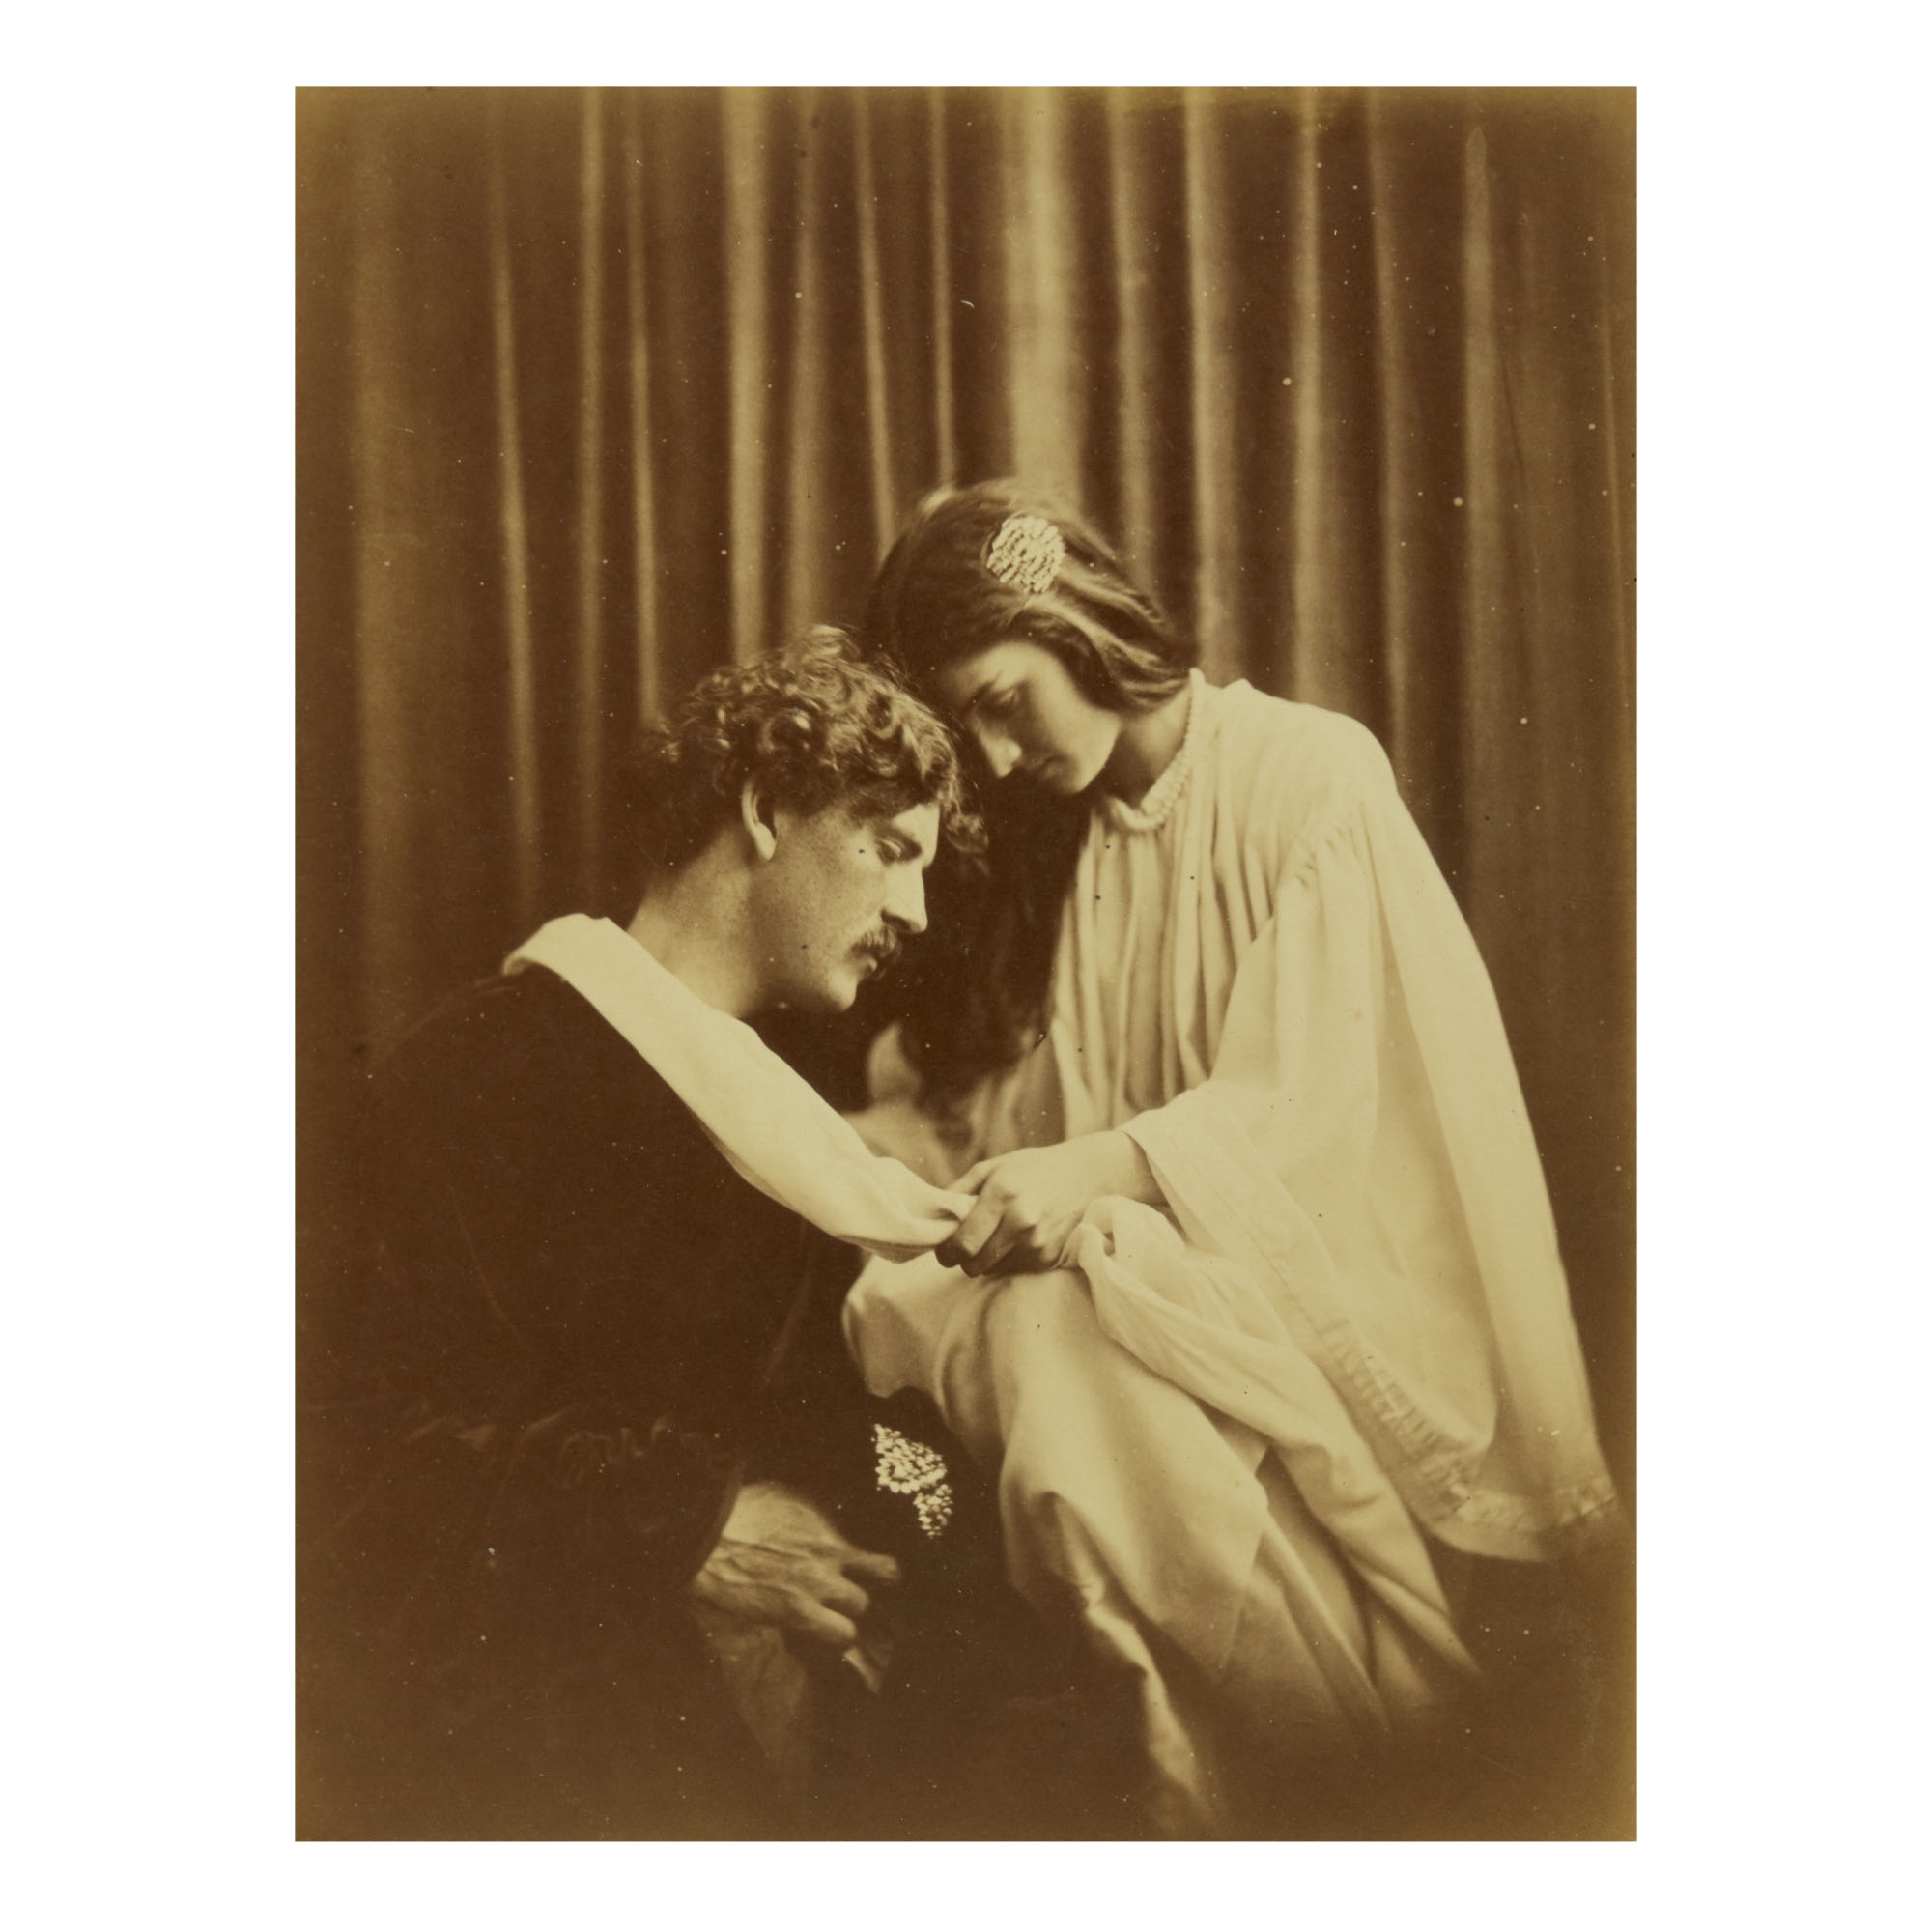 BROWNING'S SORDELLO (HENRY JOHN STEDMAN COTTON AND MARY RYAN) by Julia Margaret Cameron, 1815-1879